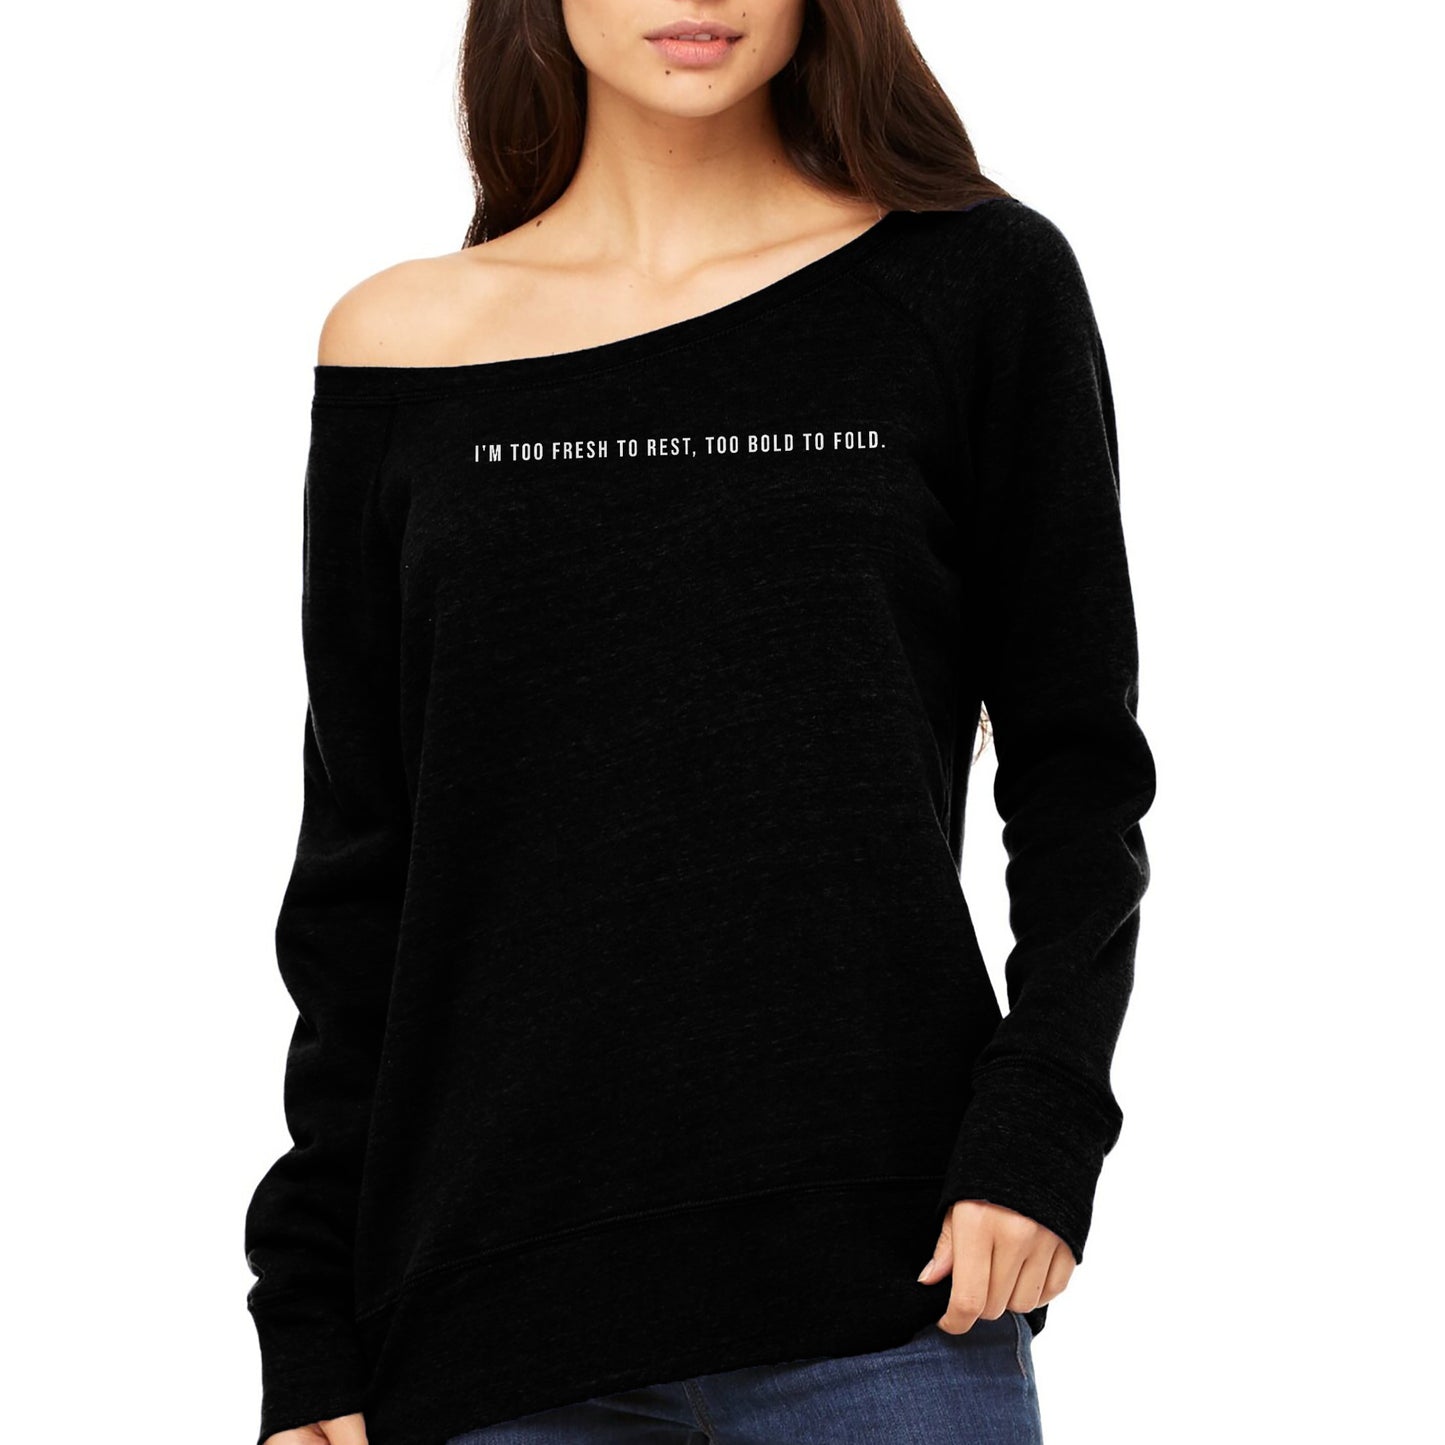 Too Fresh to Rest, Too Bold to Fold Slouchy Fleece Solid Black Model Image